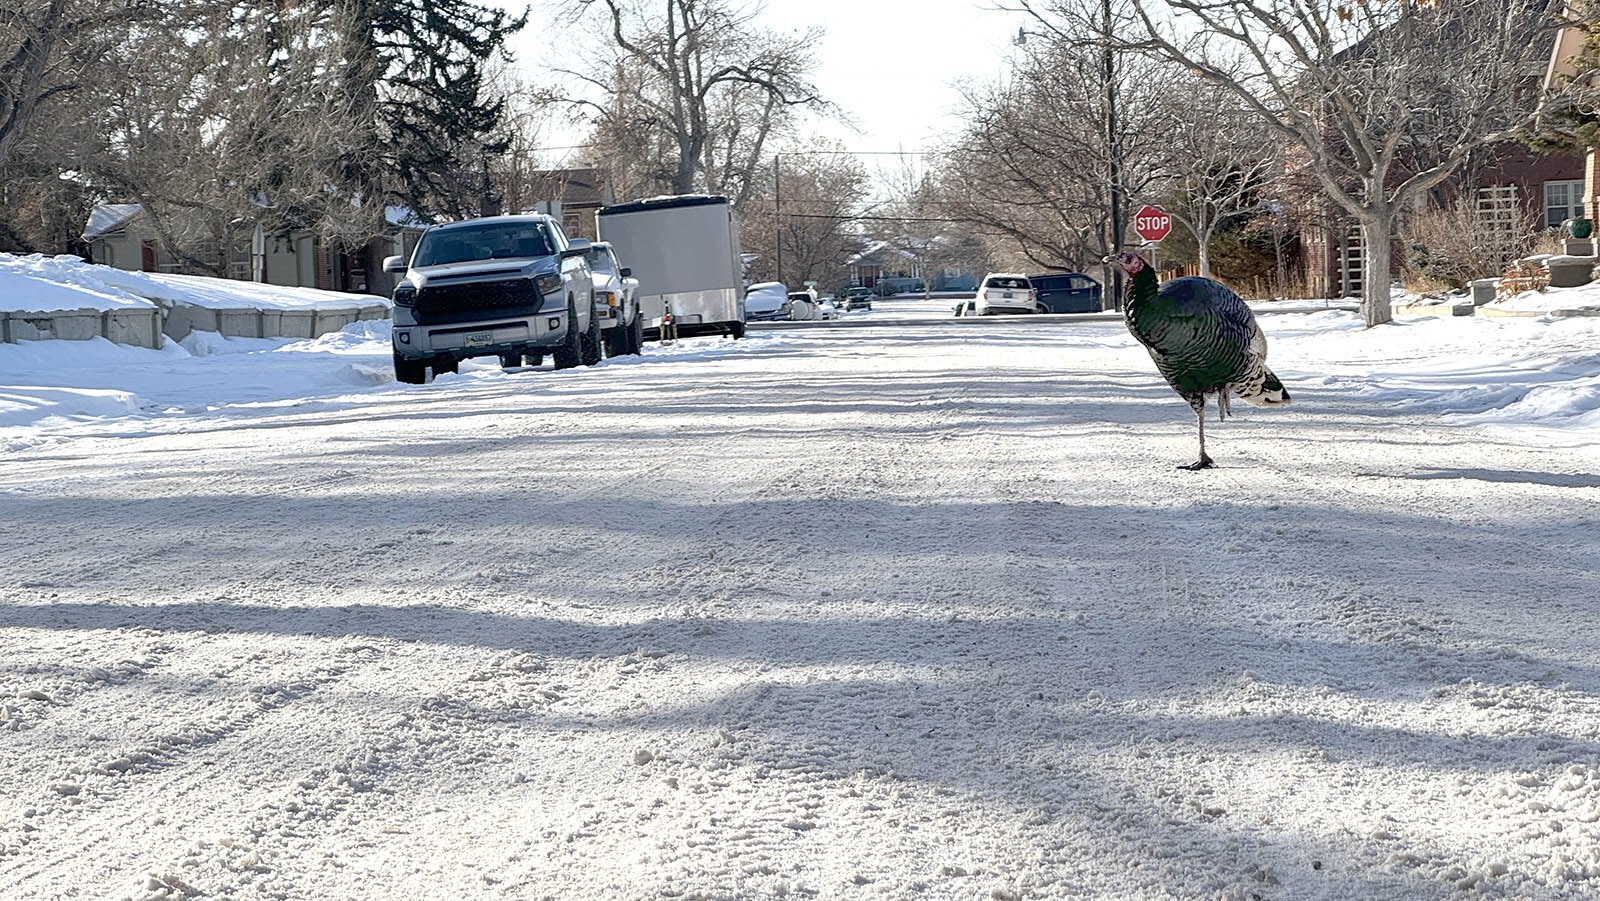 Flocks of wild turkeys are moving about Casper. Although the city outlawed feeding them about a year ago, it hasn't seemed to cut down on the wild turkeys coming into town.